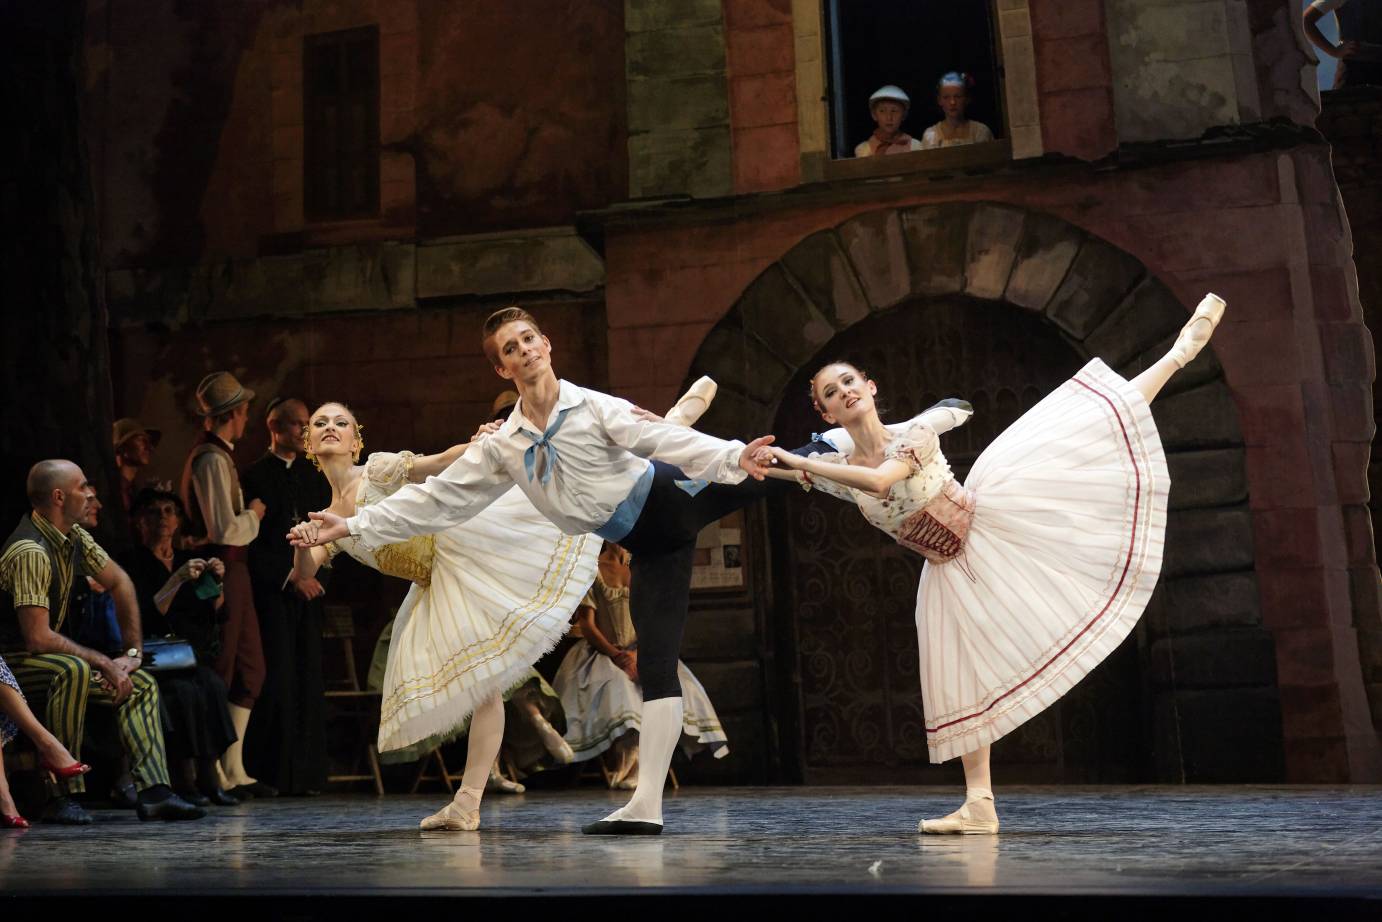 One man and two women in Romantic arabesque